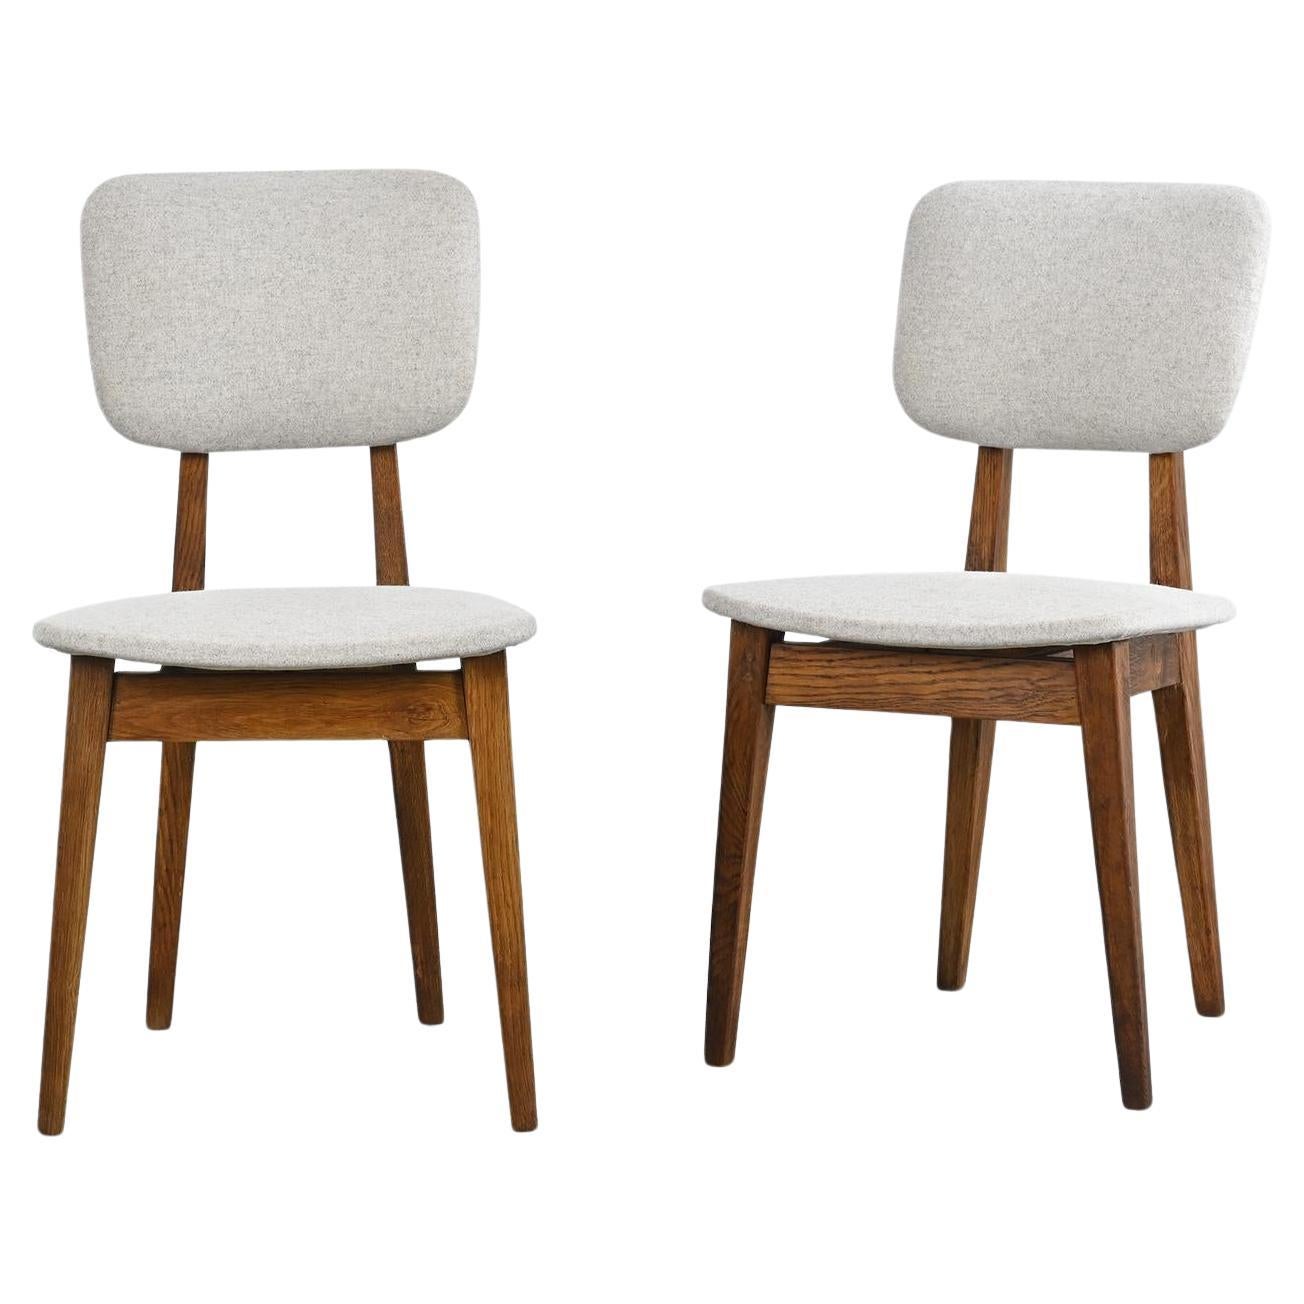  Pair of Chairs by Pierre Guariche, circa 1953